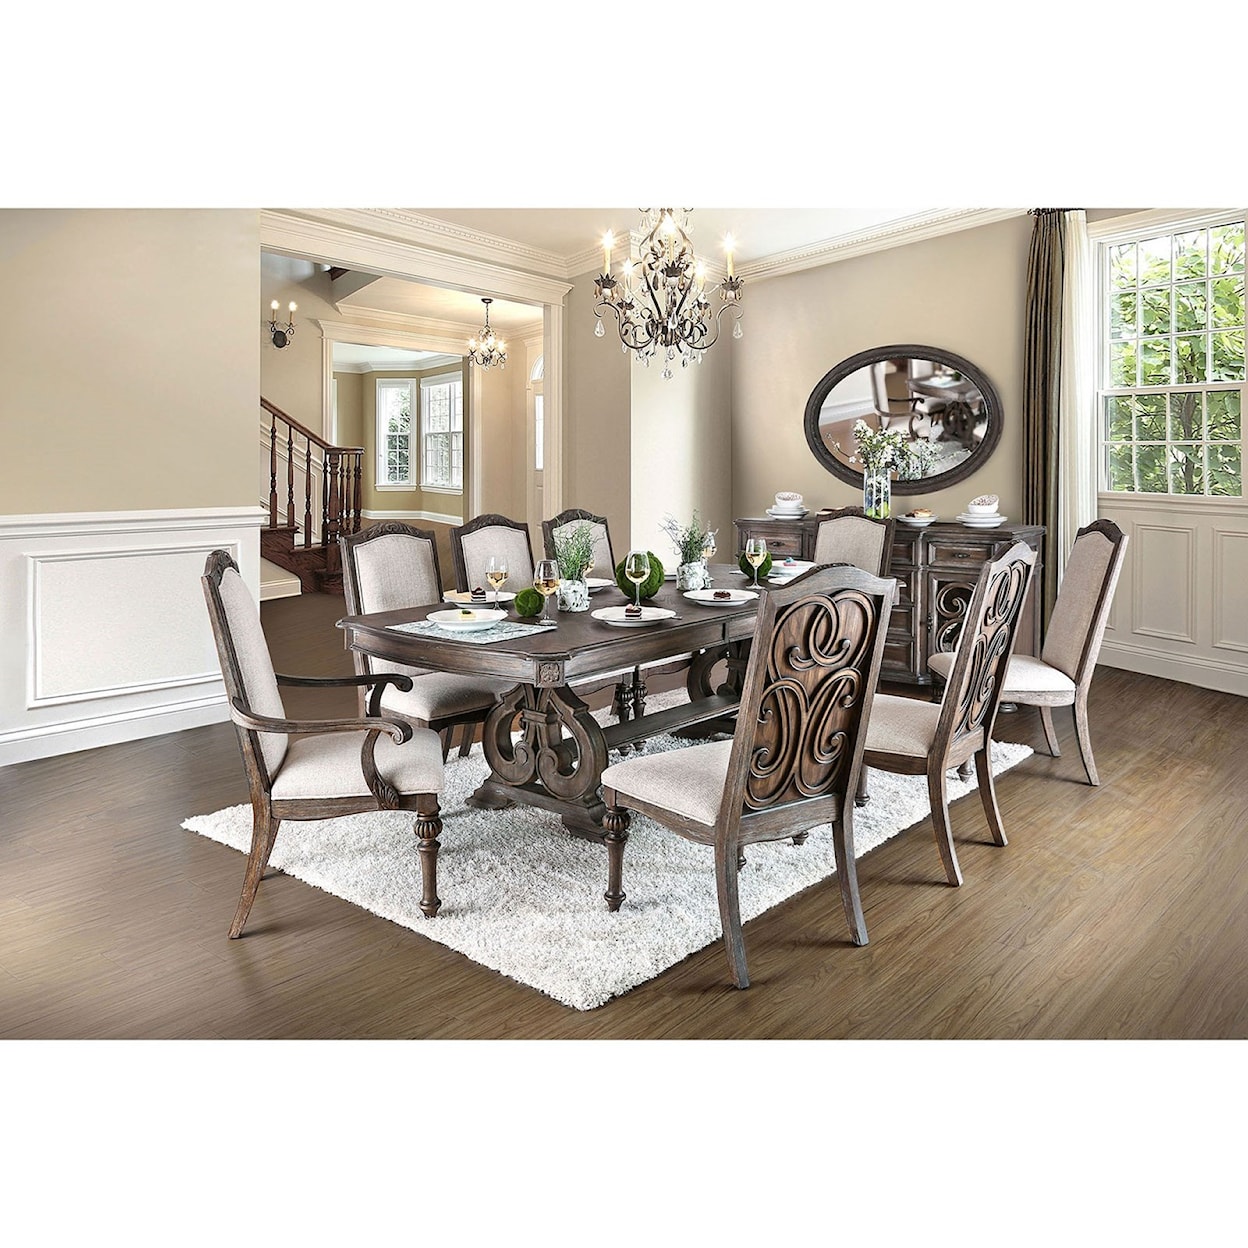 Furniture of America Arcadia Table + 2 Arm Chair + 6 Side Chairs